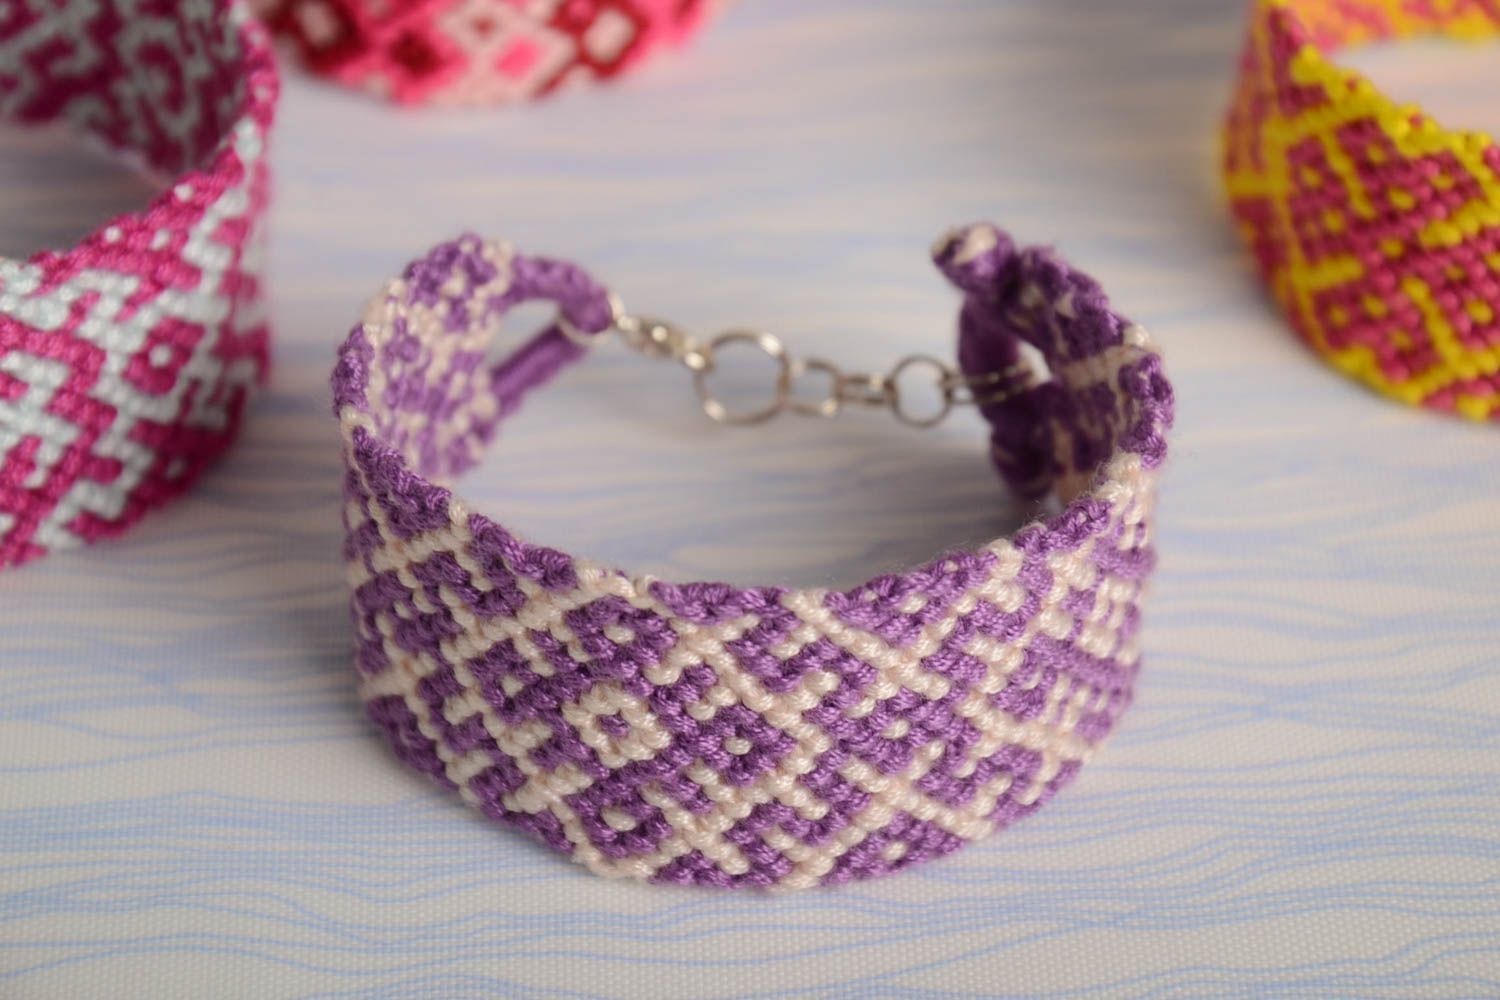 Lilac handmade bright wide wrist bracelet woven of embroidery floss photo 1